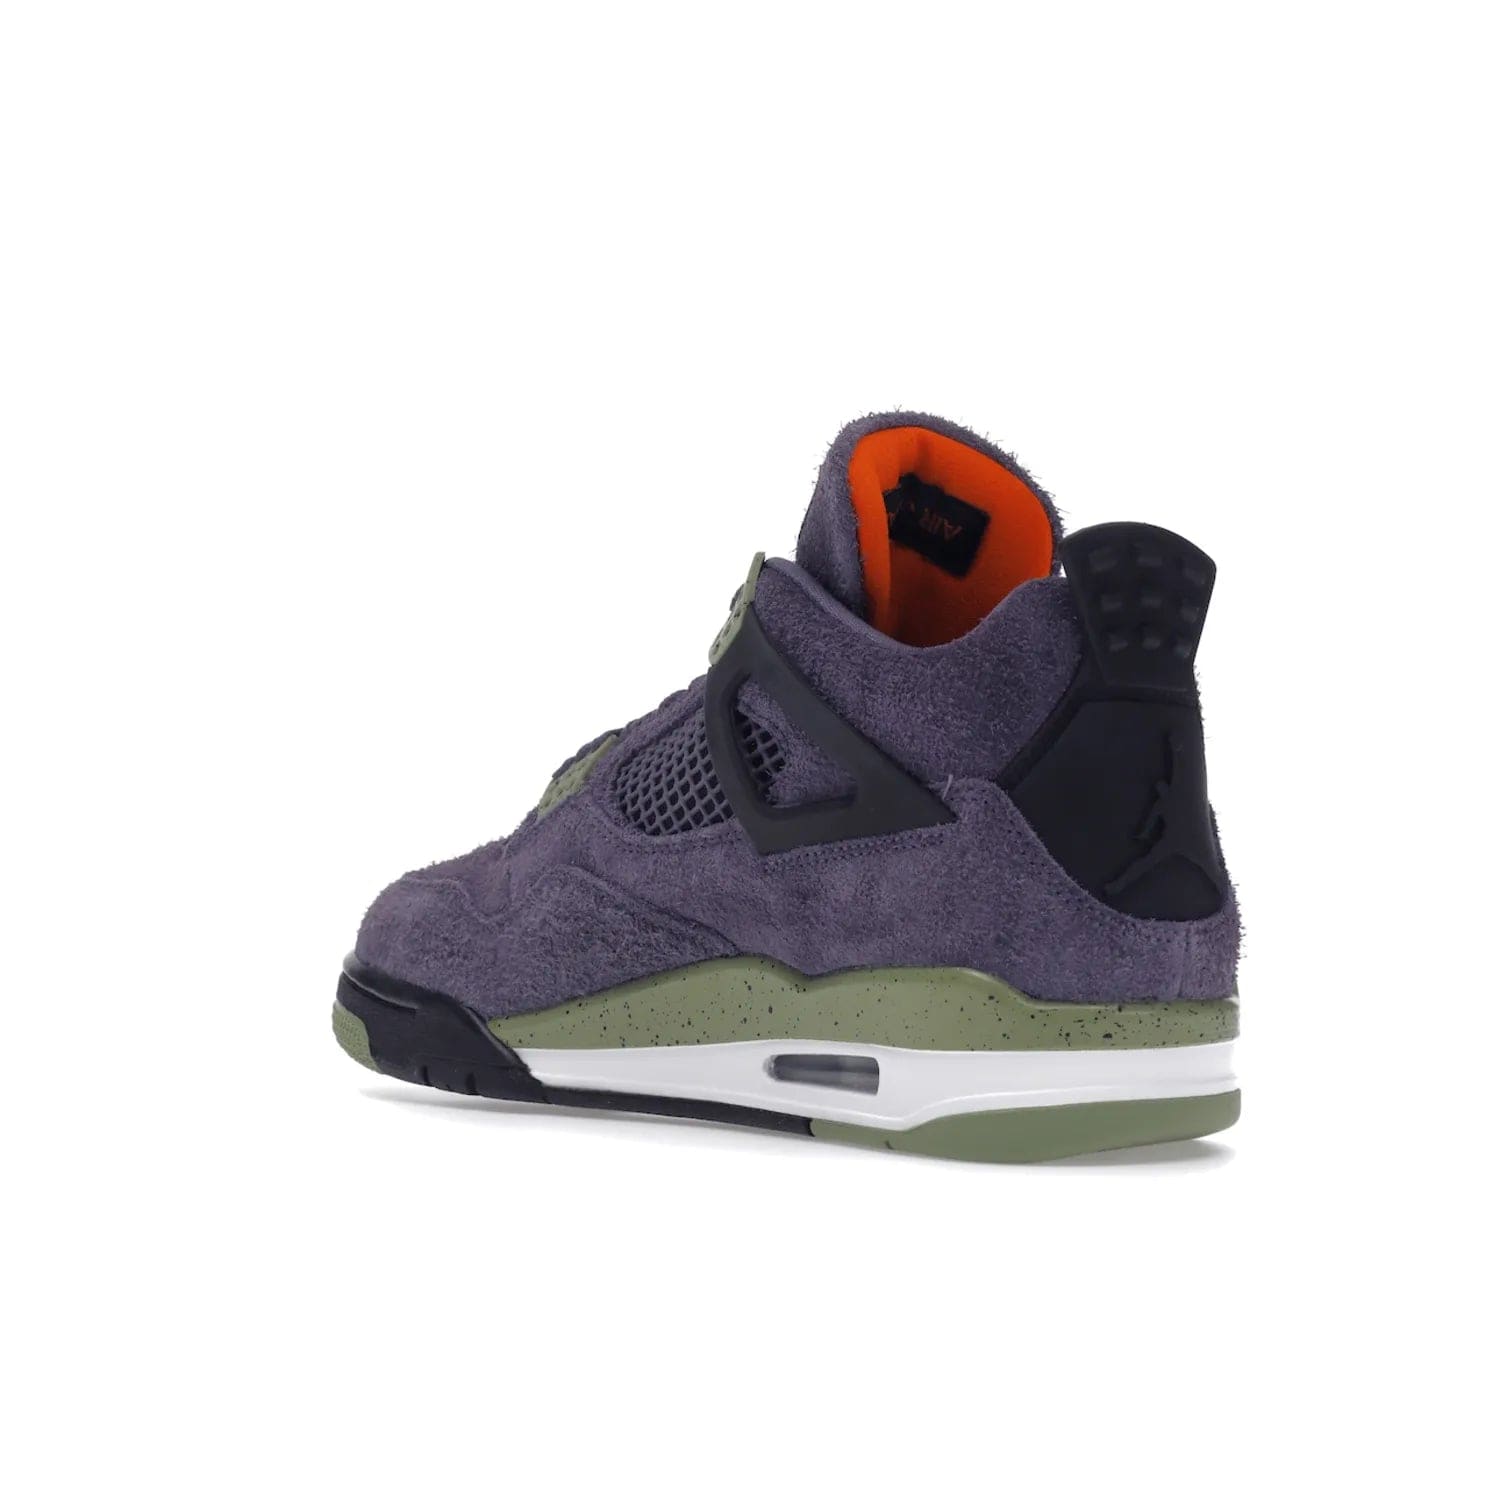 Jordan 4 Retro Canyon Purple (Women's) - Image 24 - Only at www.BallersClubKickz.com - New Air Jordan 4 Retro Canyon Purple W sneaker features shaggy purple suede, lime highlights & safety orange Jumpman branding. Classic ankle-hugging silhouette with modern colors released 15/10/2022.